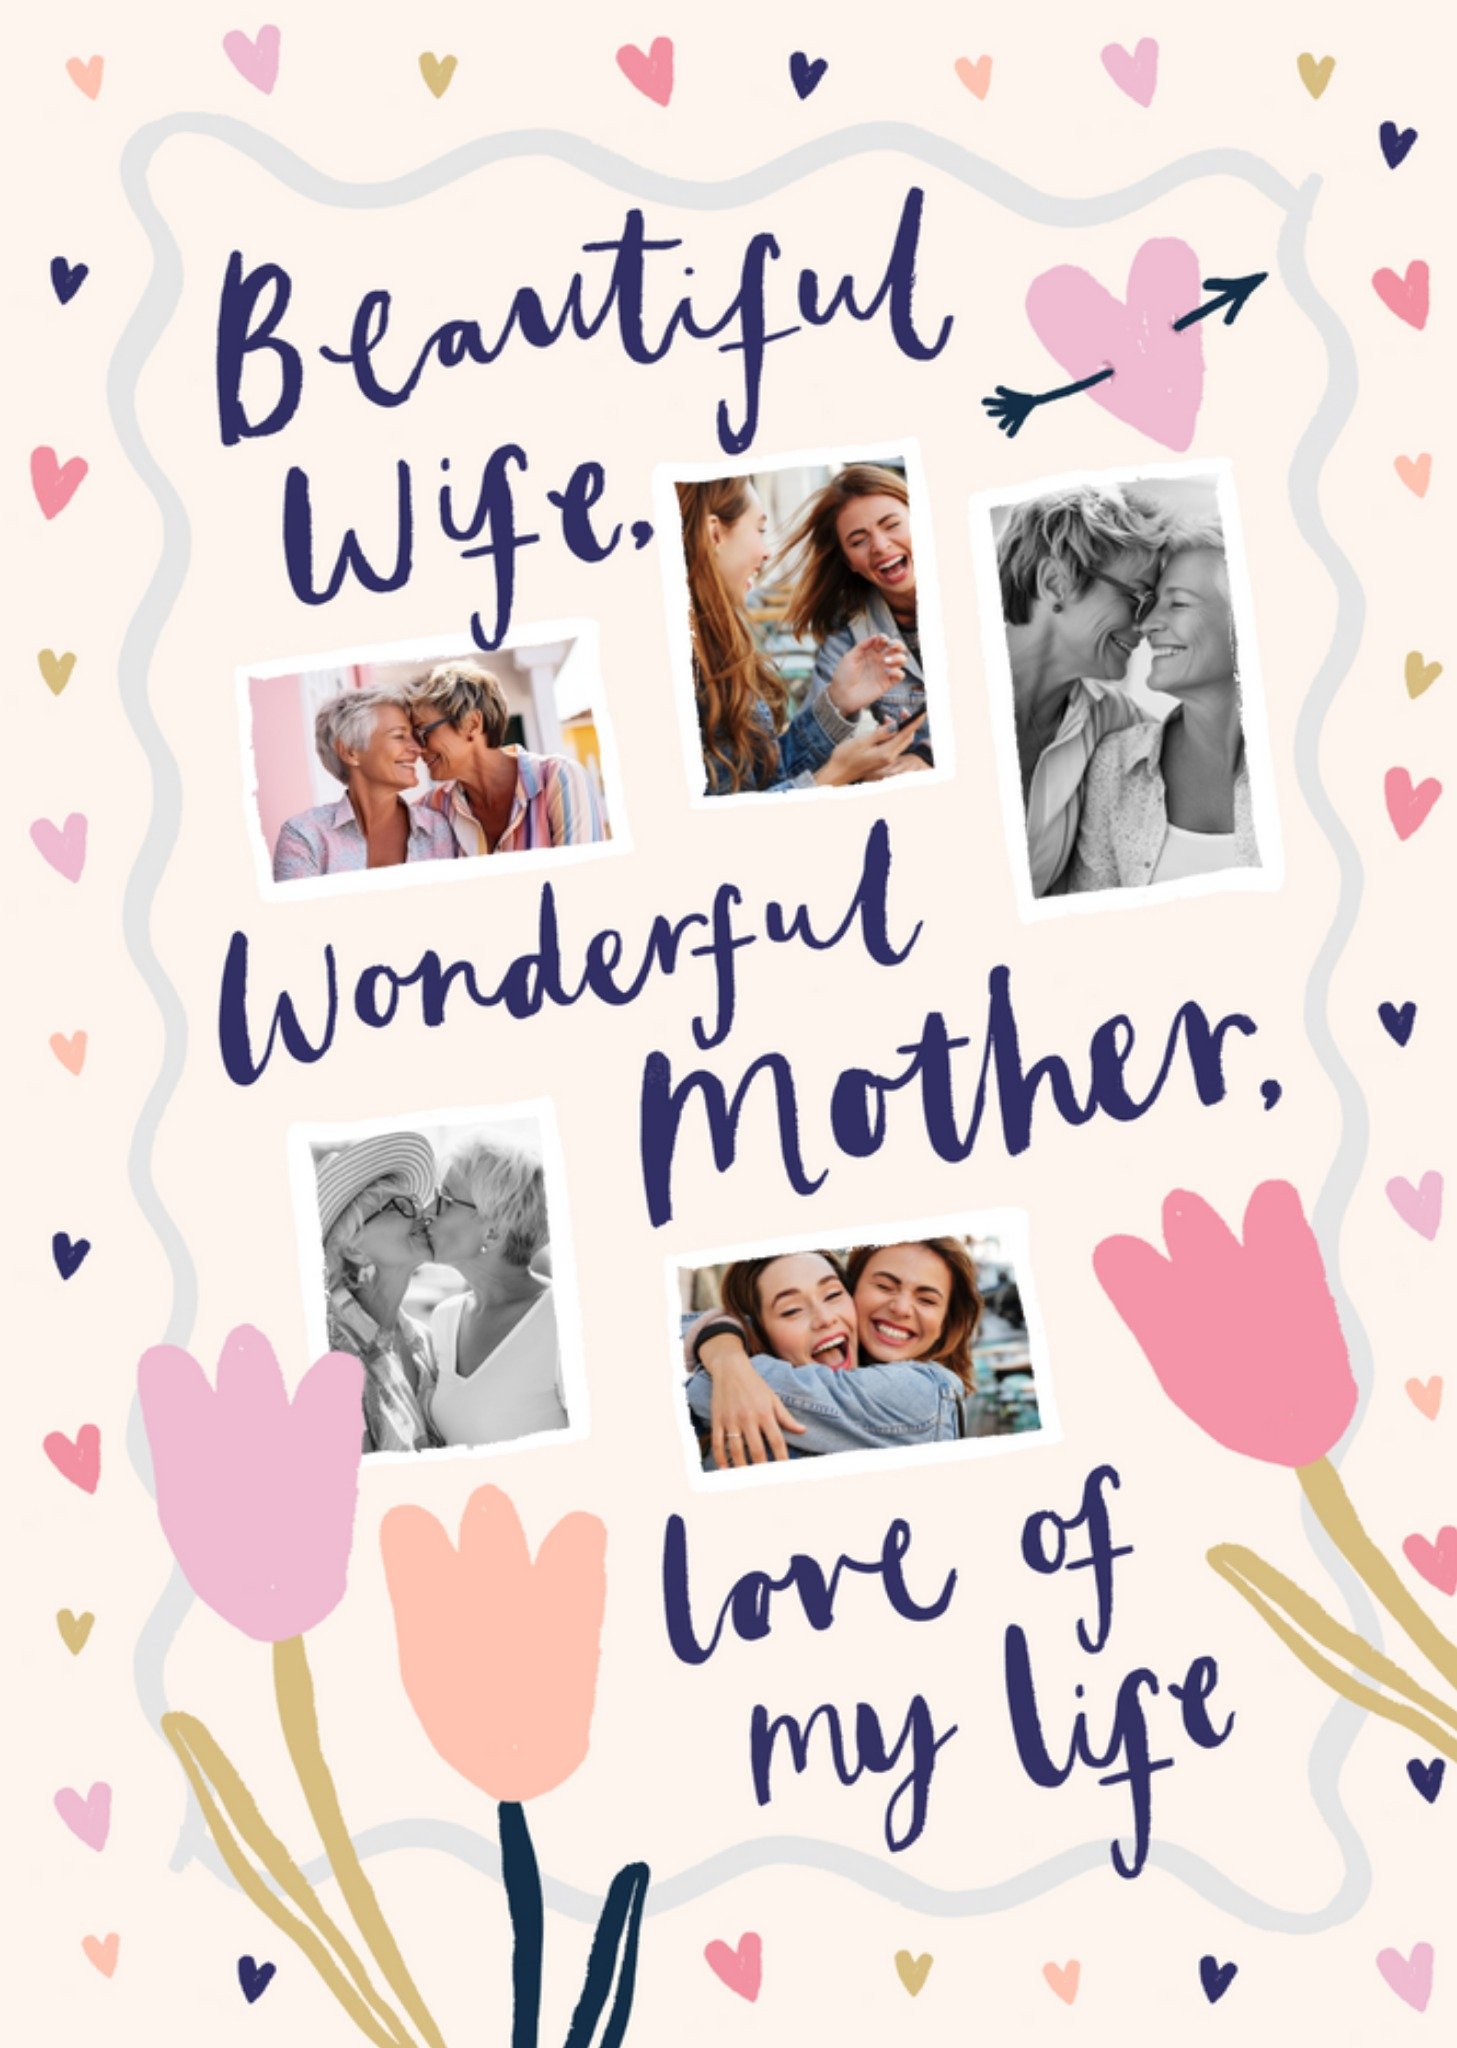 Moonpig Sweet Sentiments Beautiful Wife Wonderful Mother Photo Upload Mother's Day Card Ecard